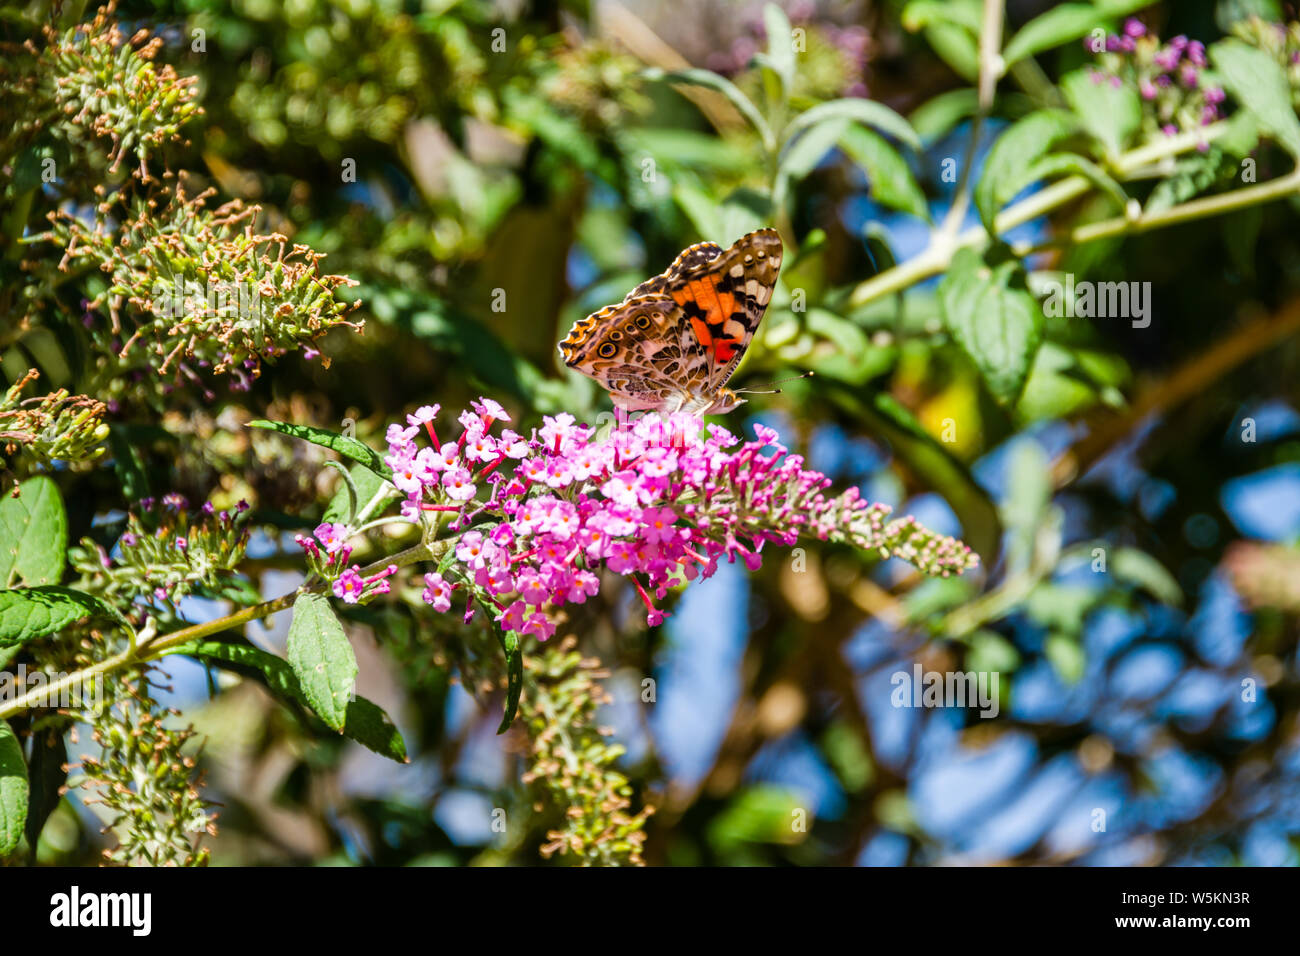 Brush-Footed Butterfly Stock Photo